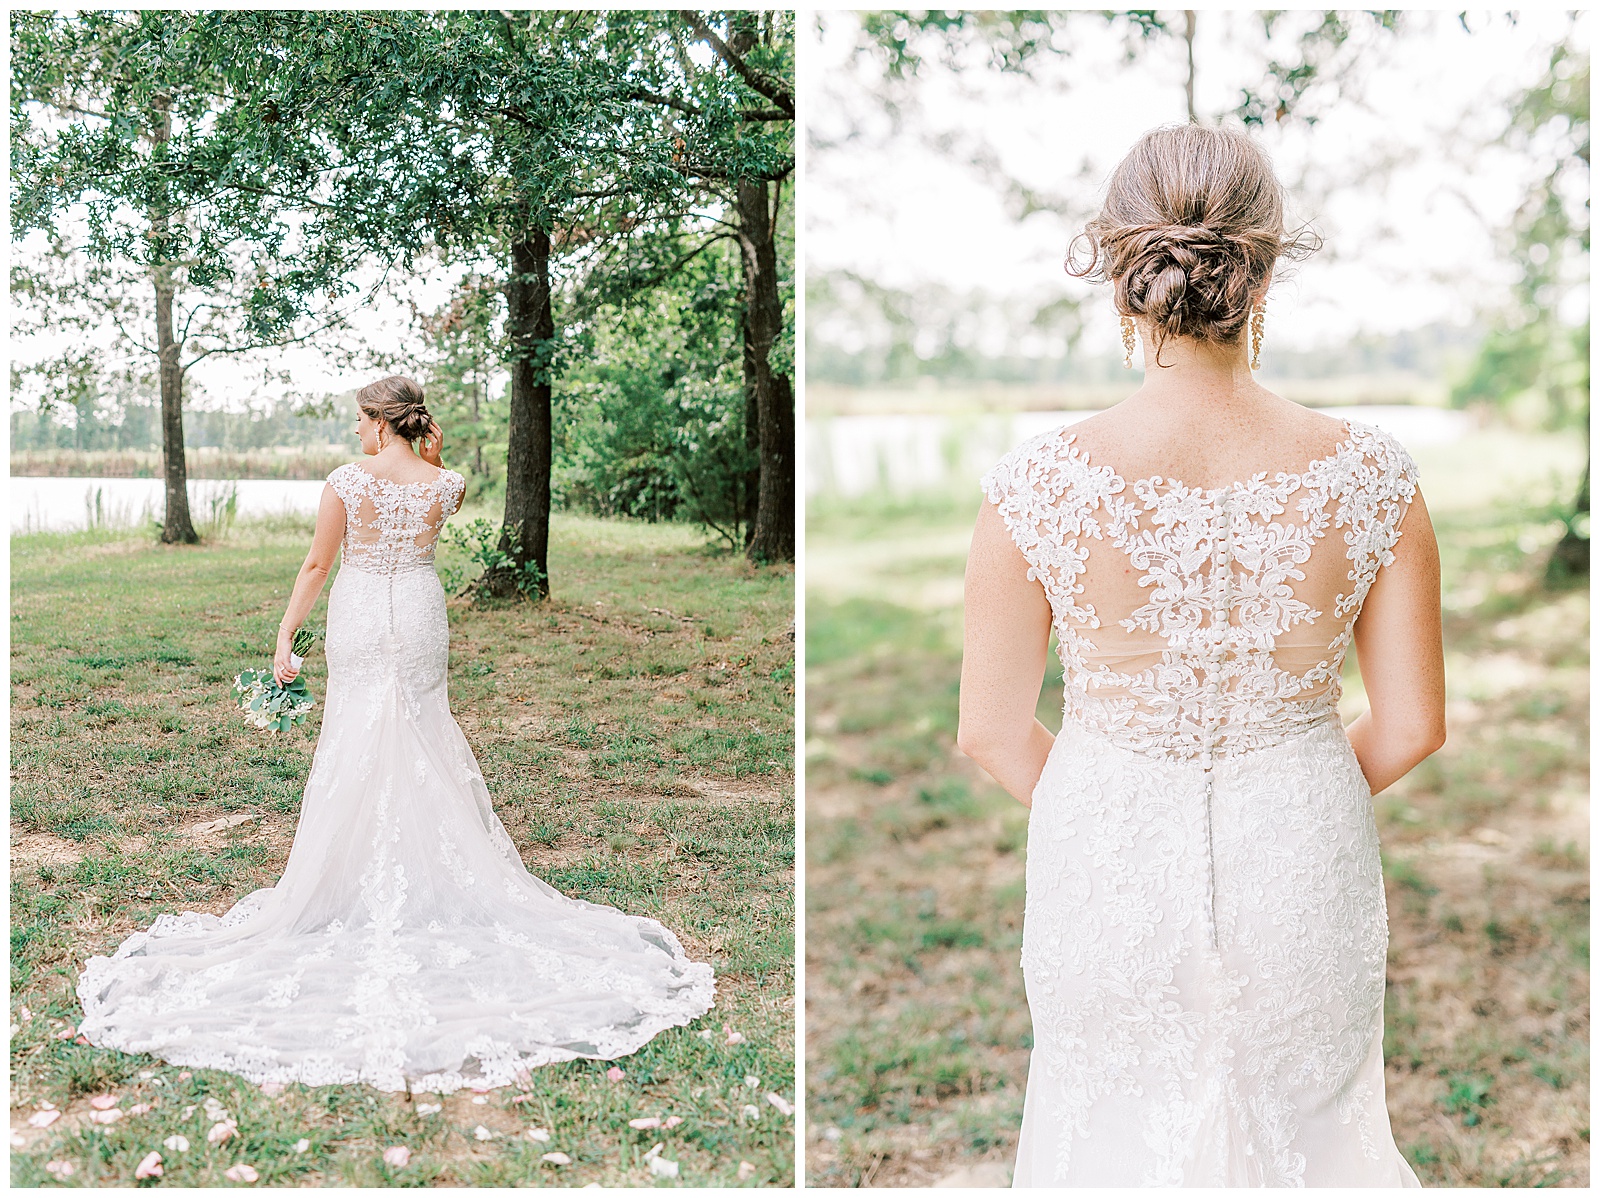 updo detail shots of gorgeous blonde haired bridal portraits in long train lace dress for outdoor summer wedding